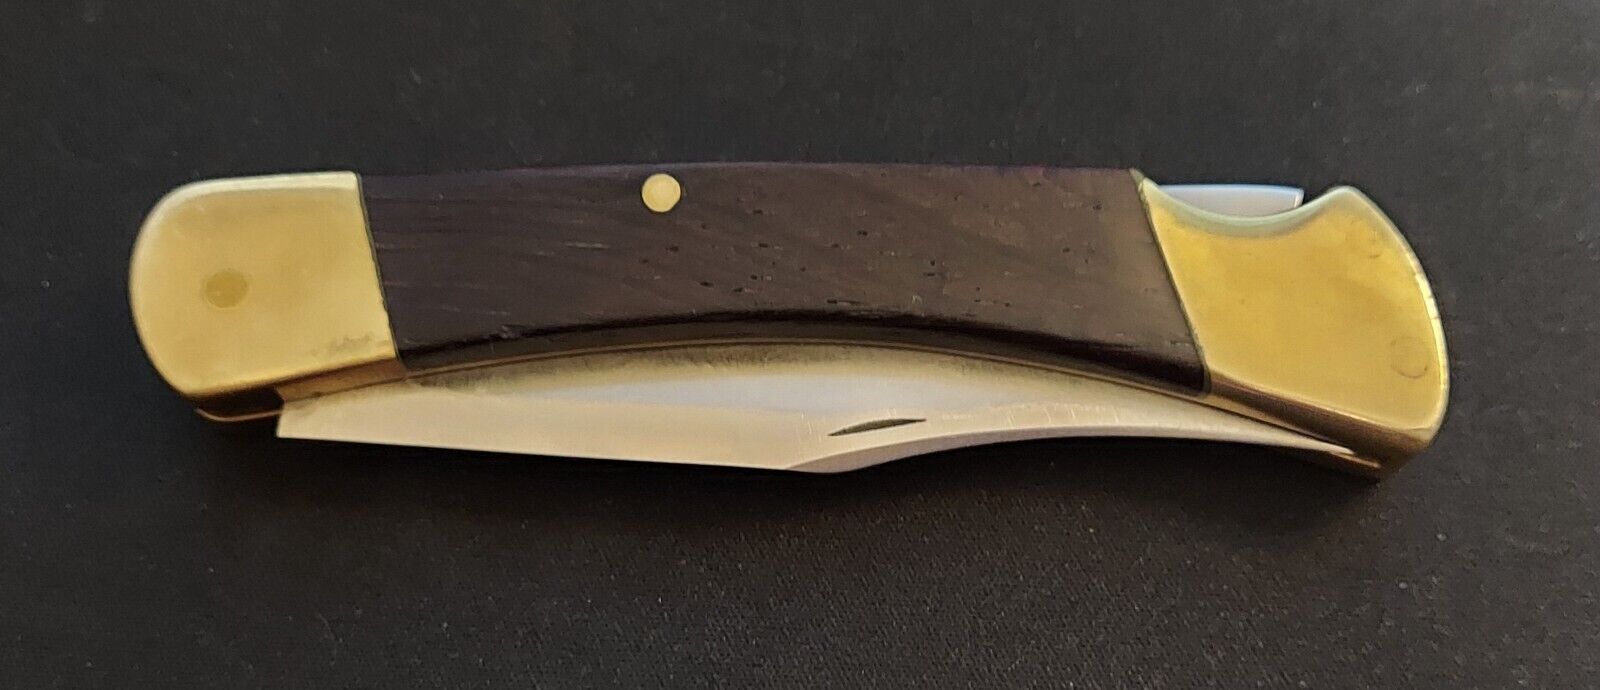 Vintage BUCK 110 knife Inverted Late 1960's  USA